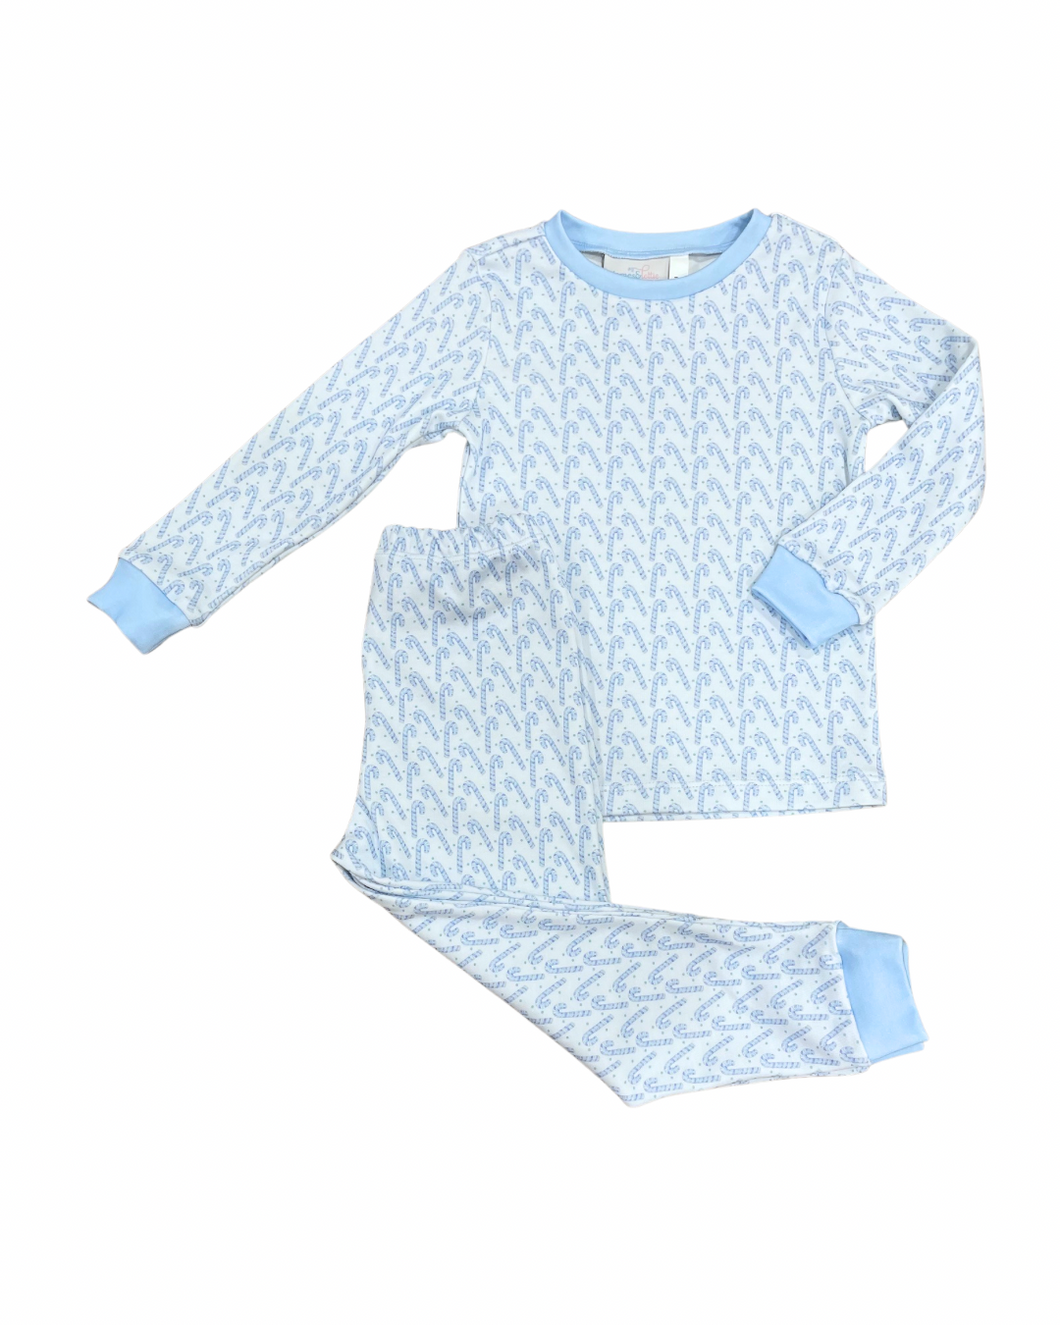 Boys Two-Piece Jammies, Candy Cane